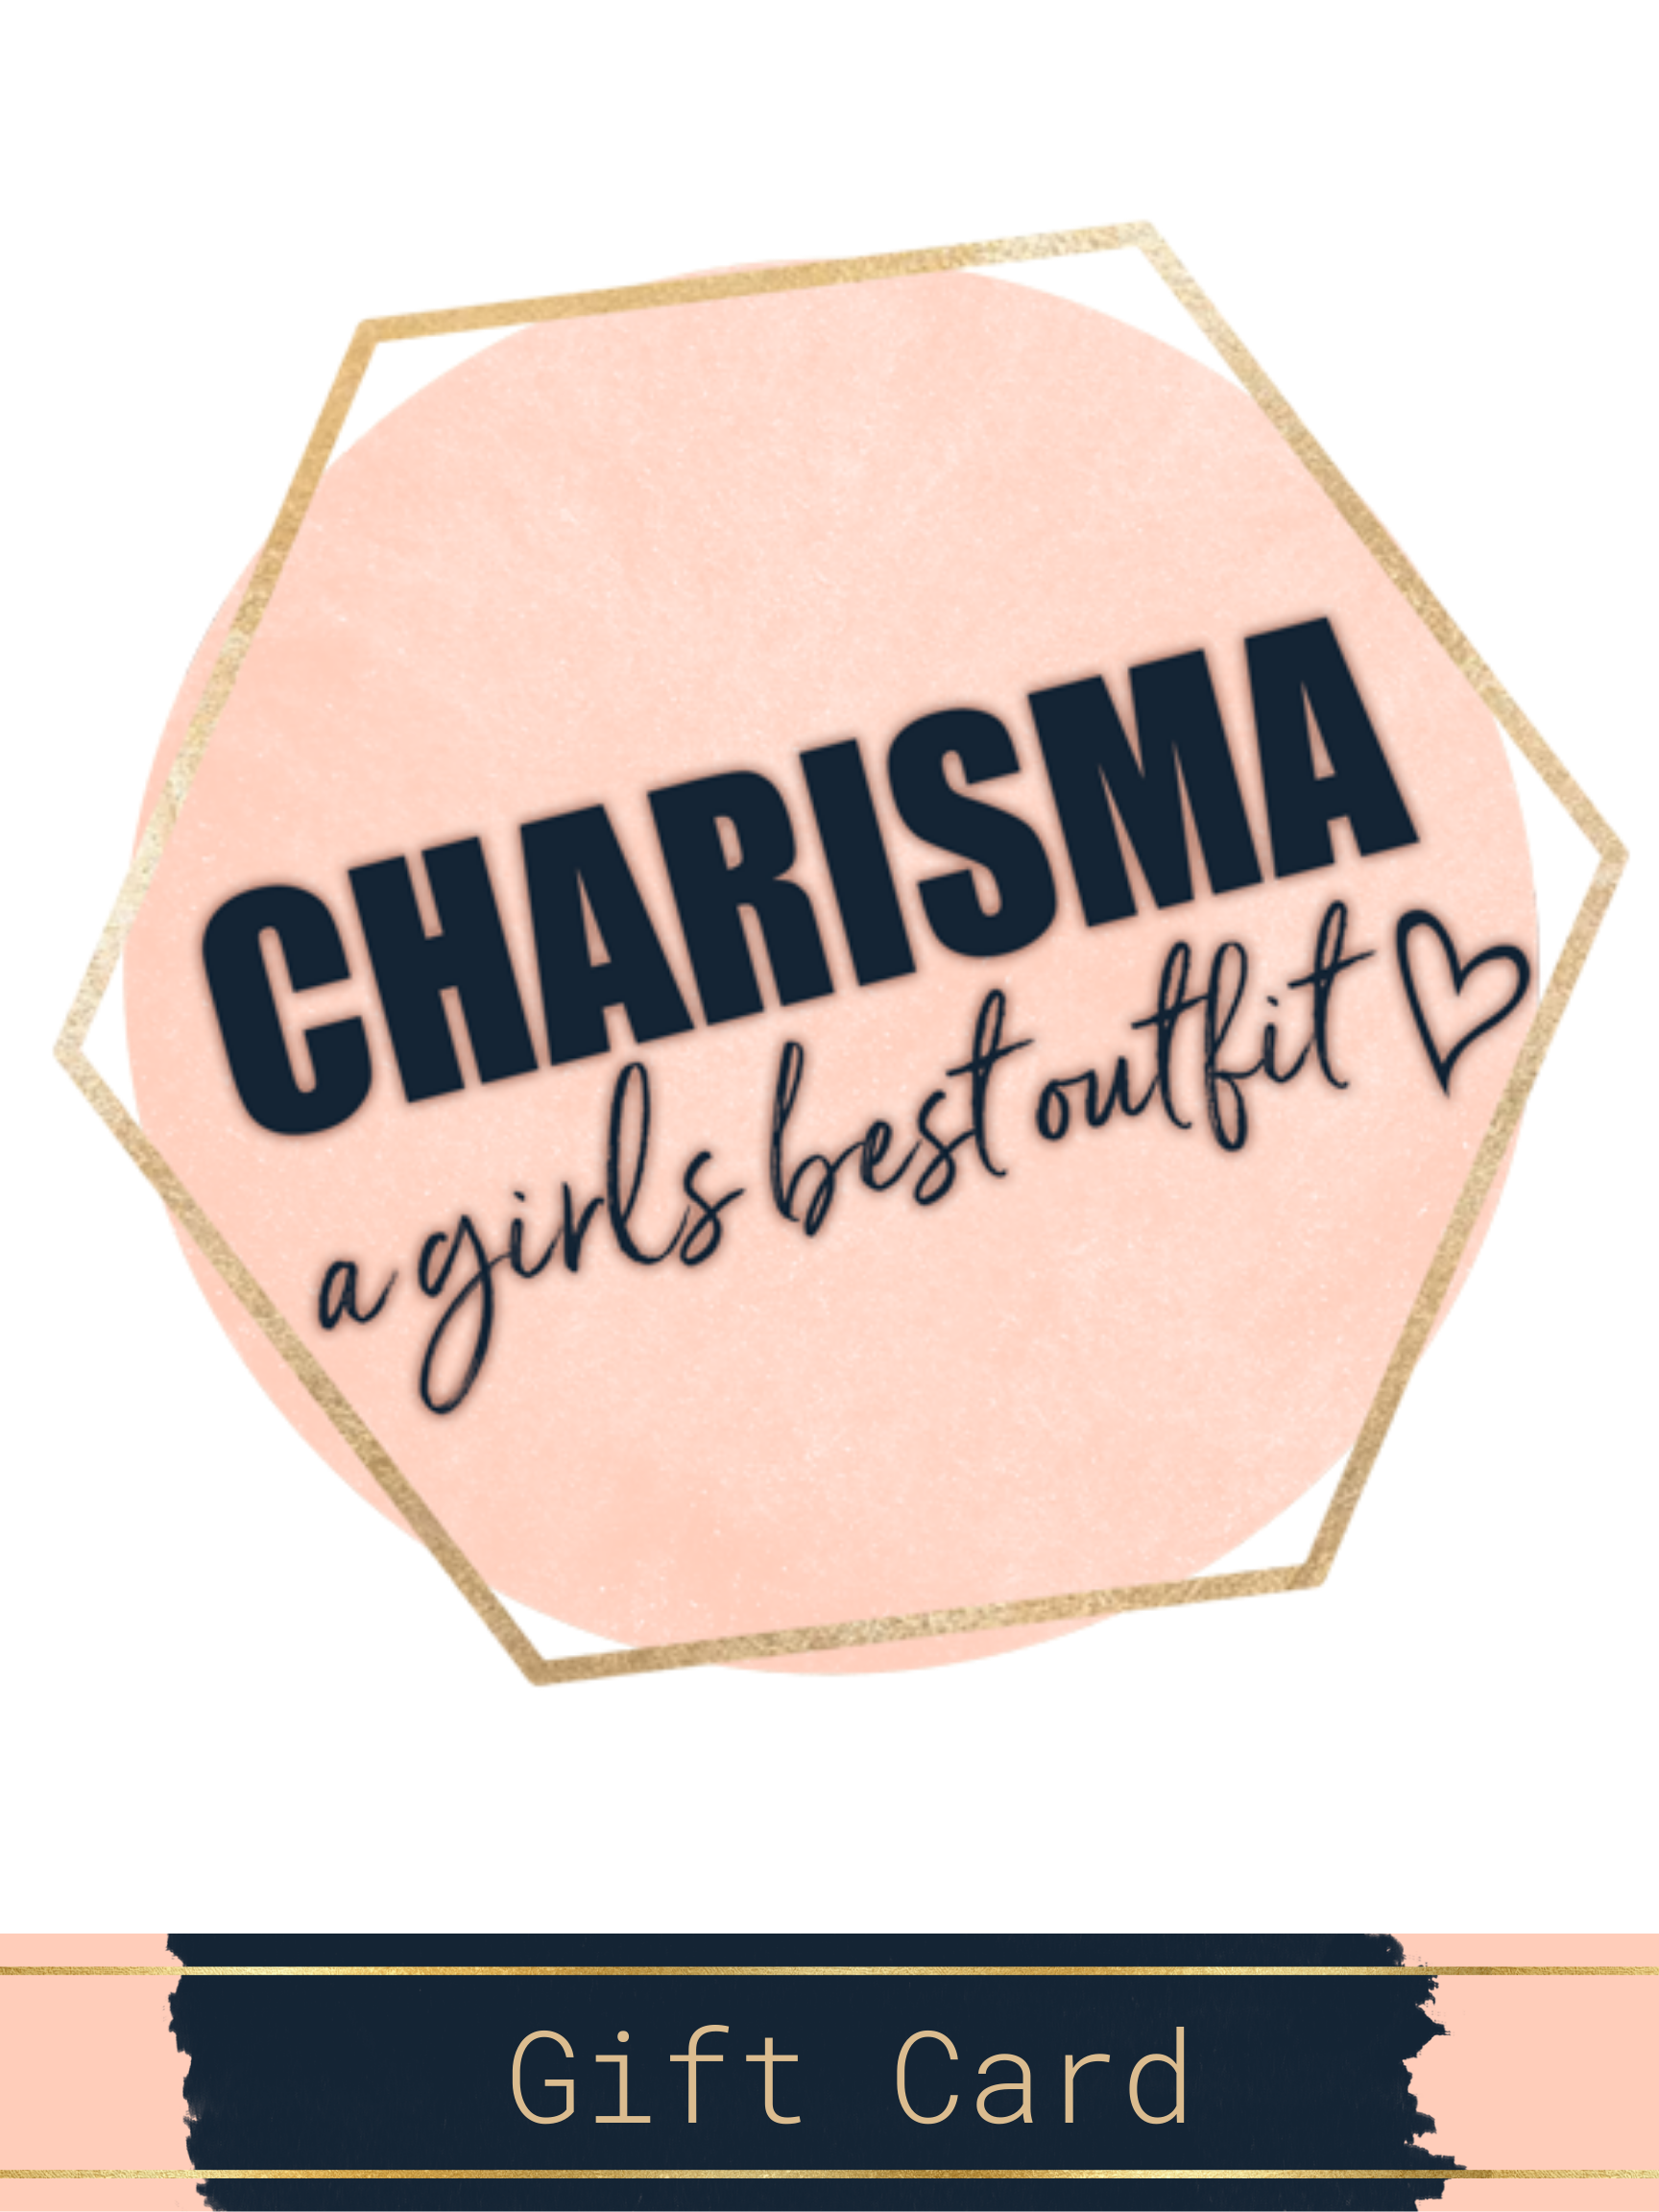 Charisma Online Gift Card